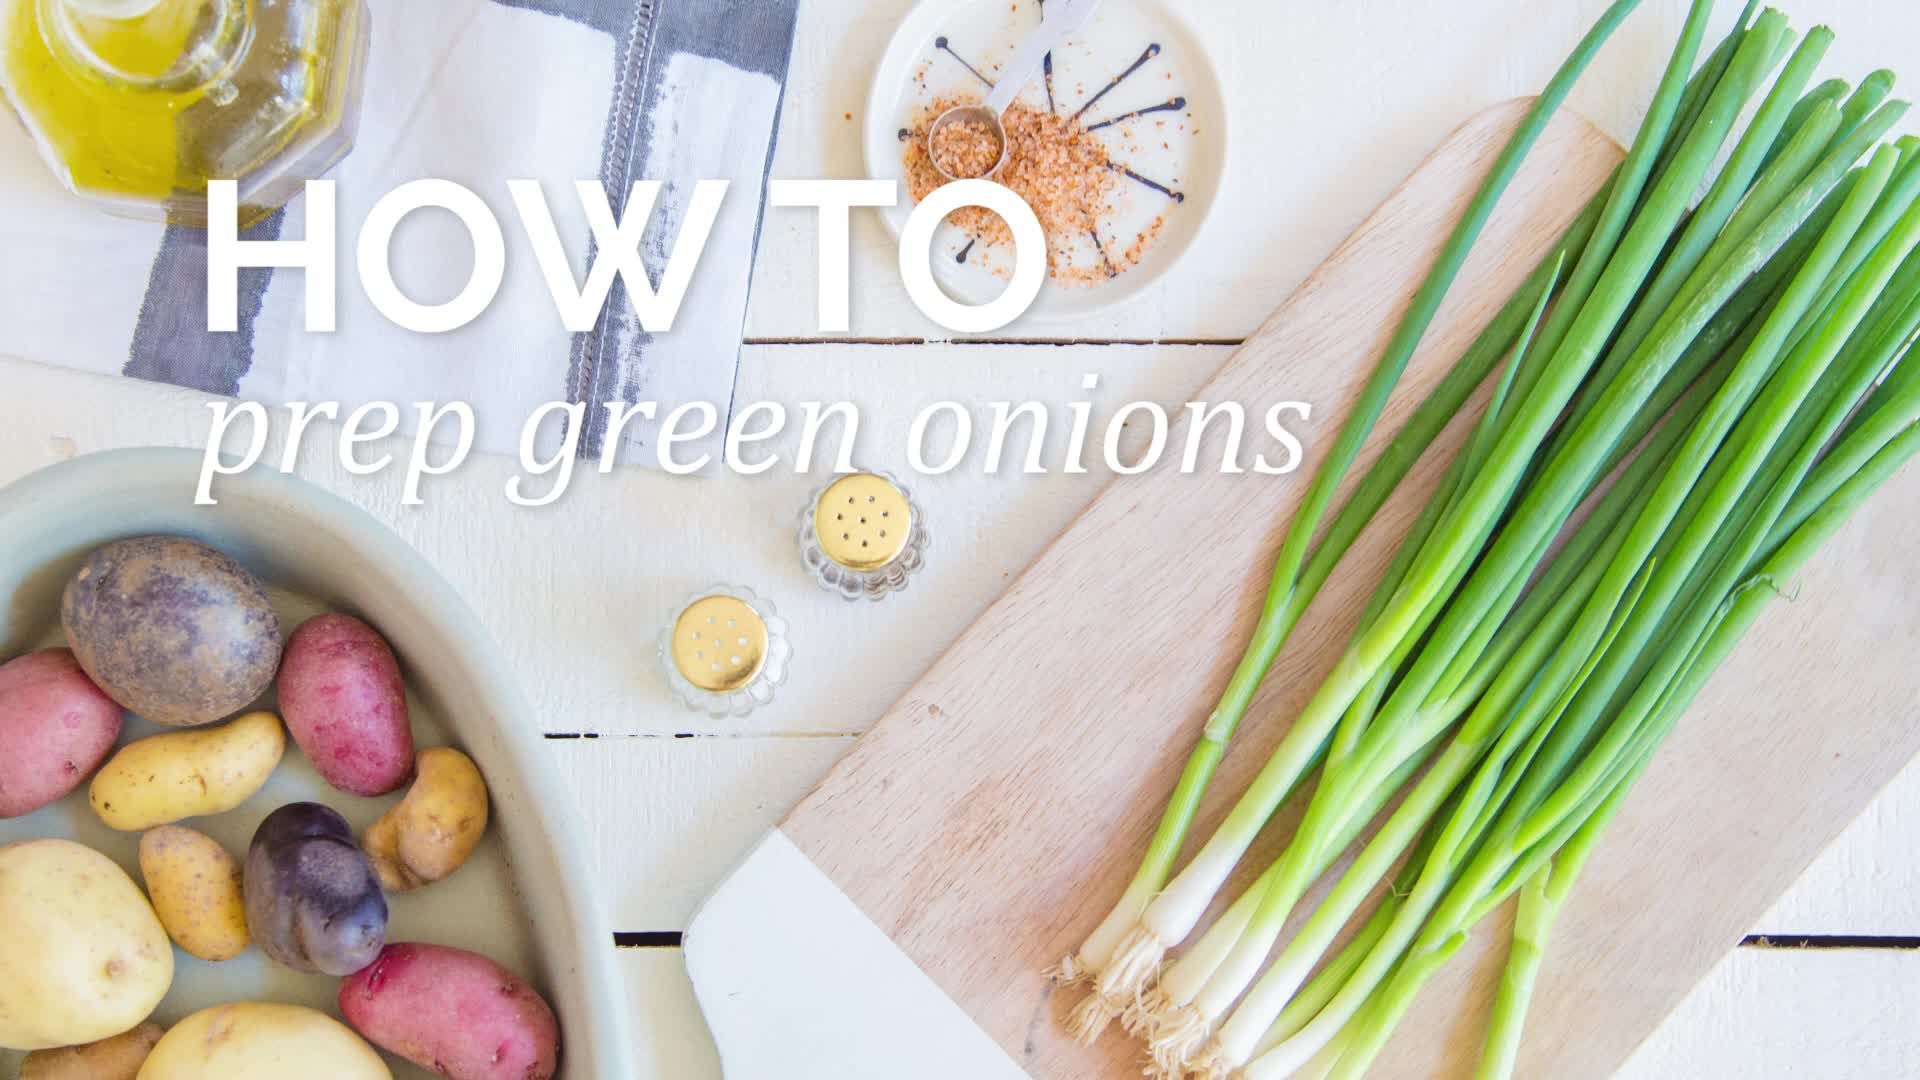 How to : Prep green onion